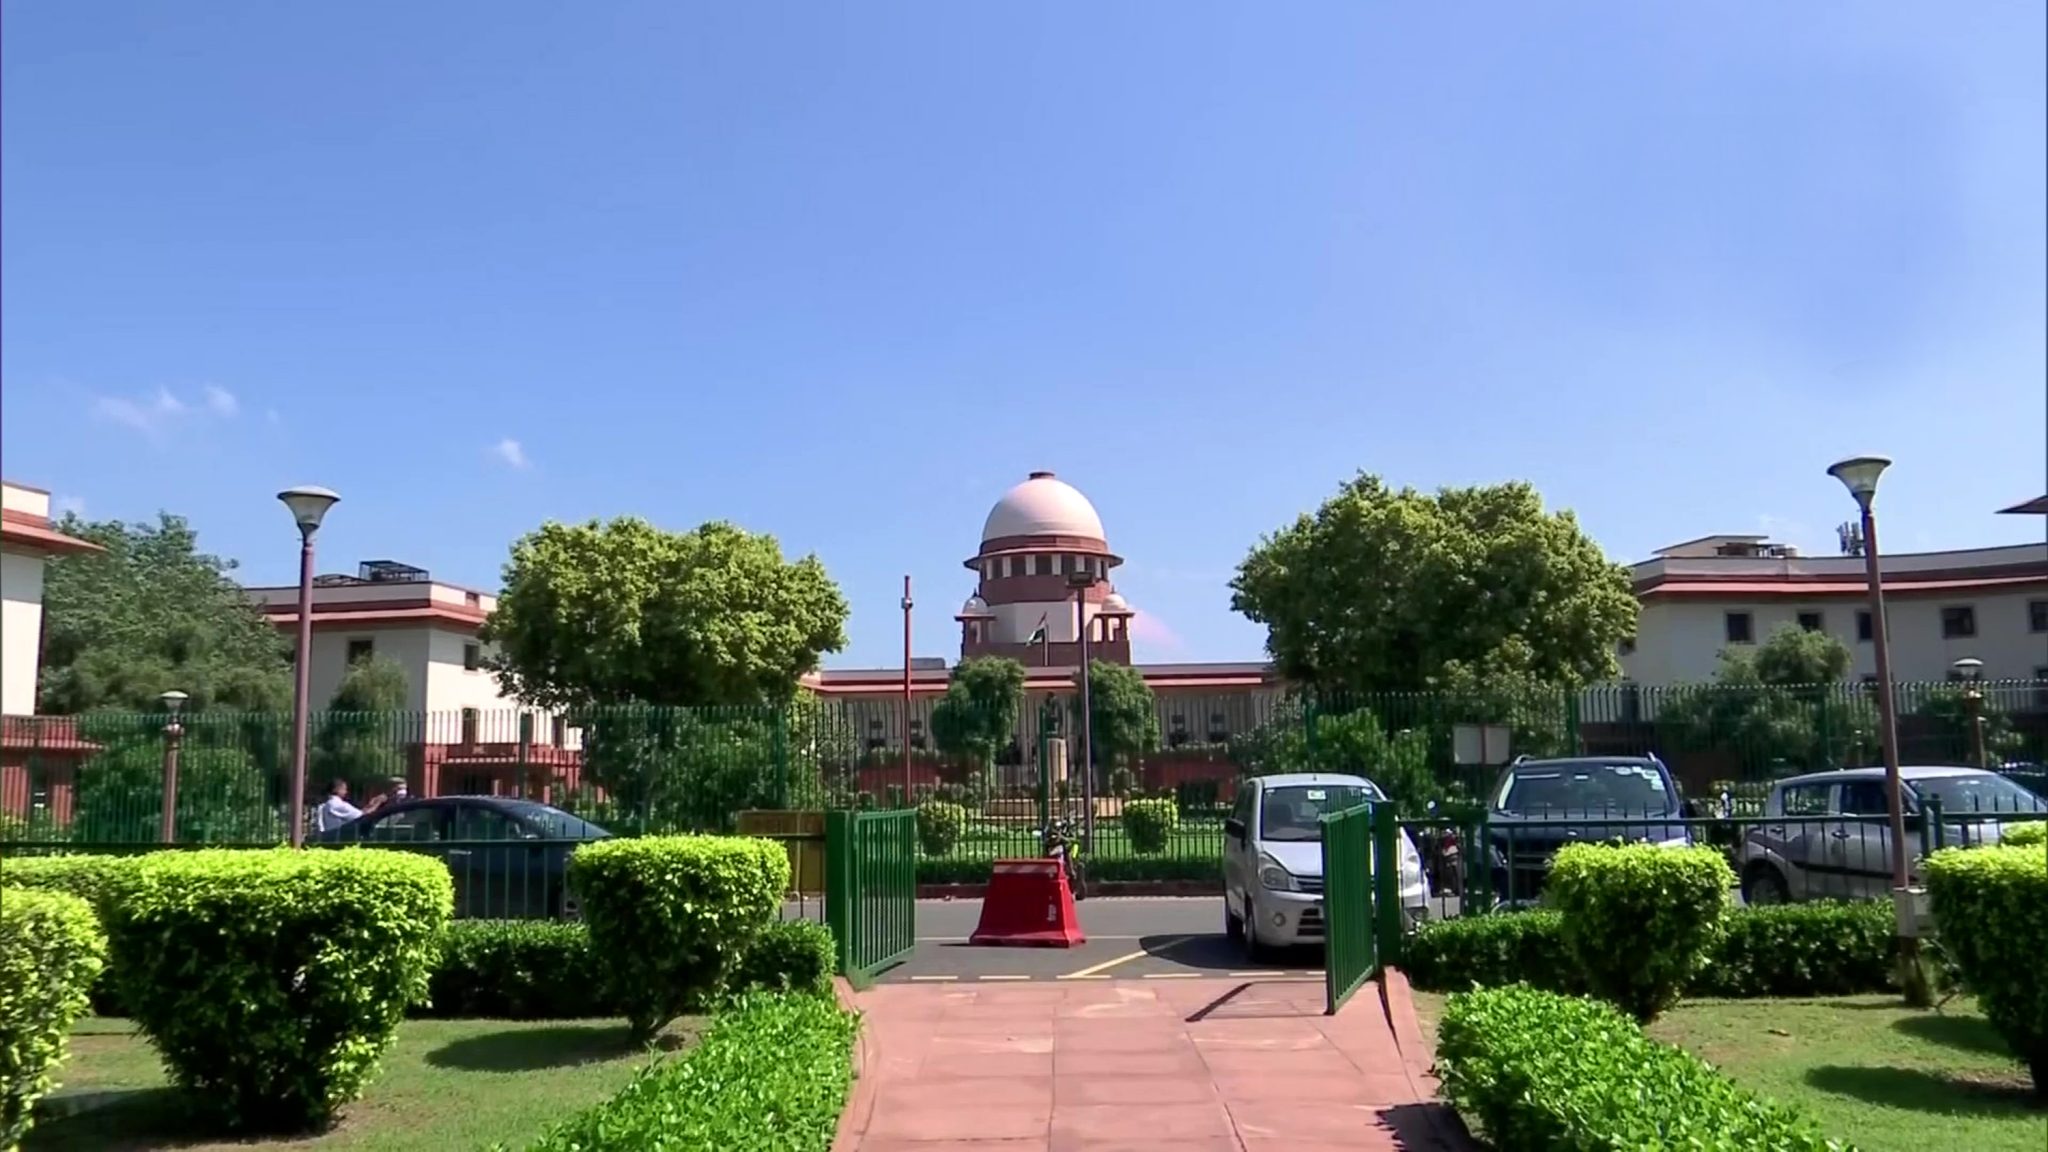 Will Take Up Issue Of Land Allotment For Lawyers’ Chambers With Govt: Supreme Court